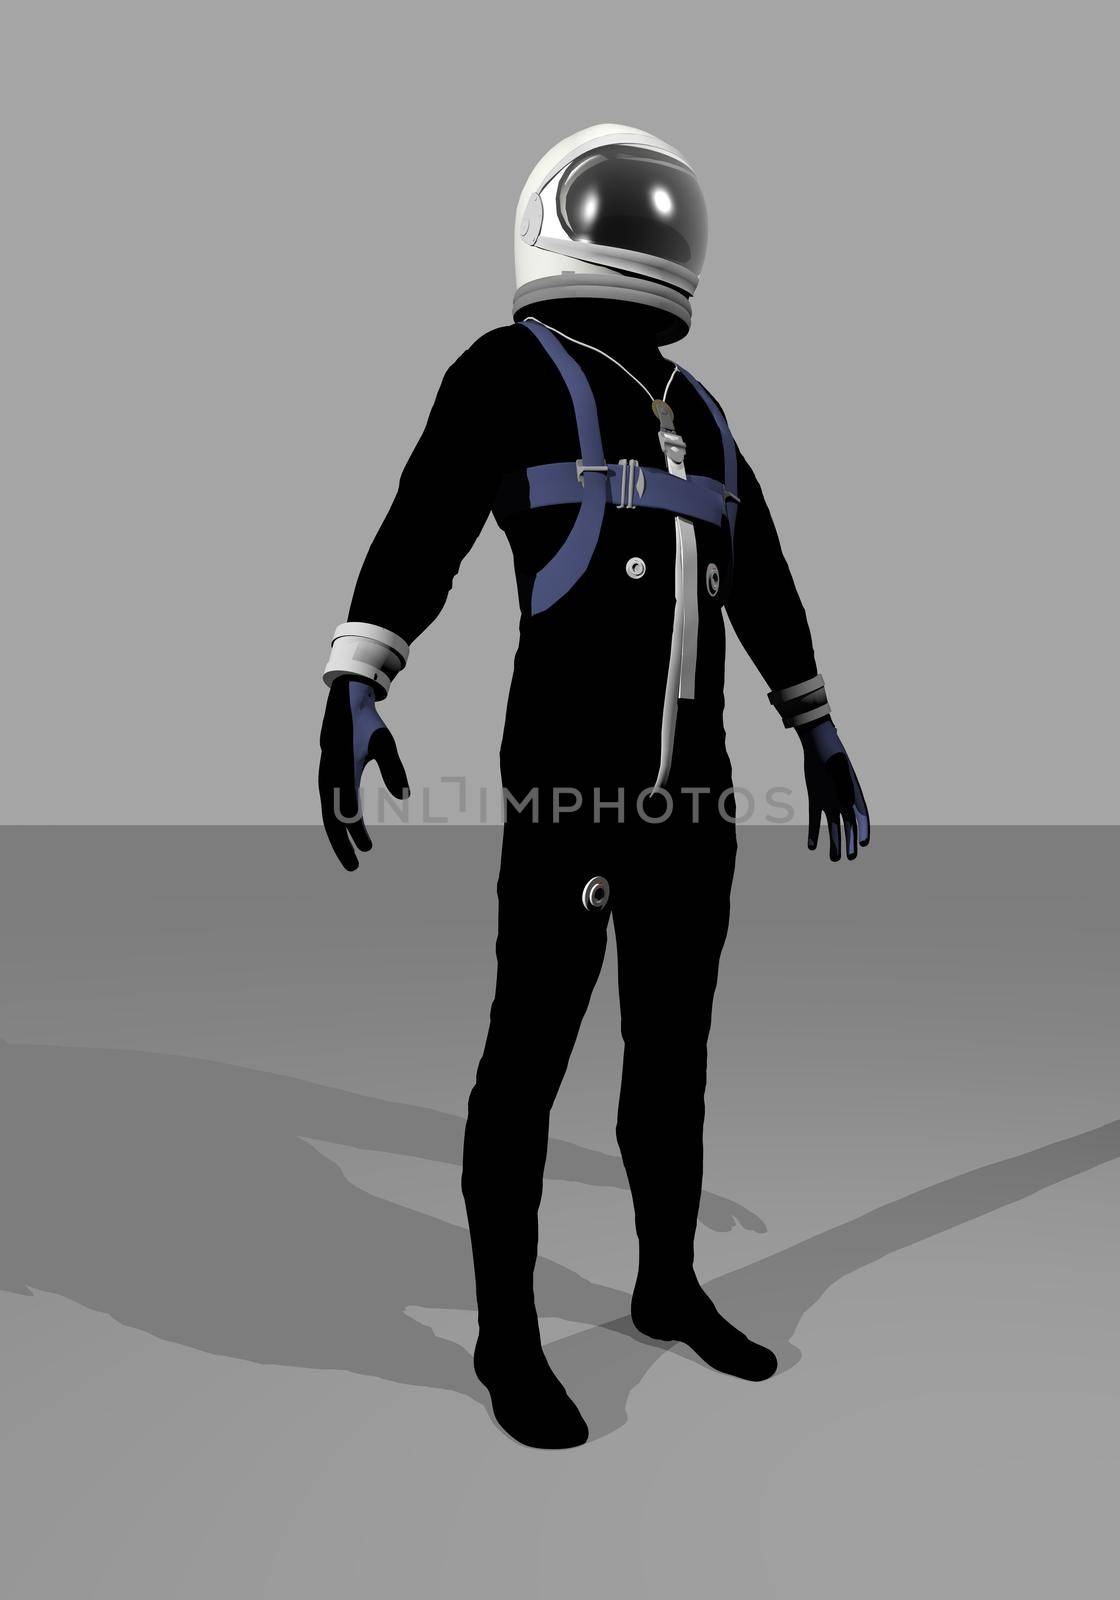 Black mercury space suit standing in grey background - Elements of this image furnished by NASA